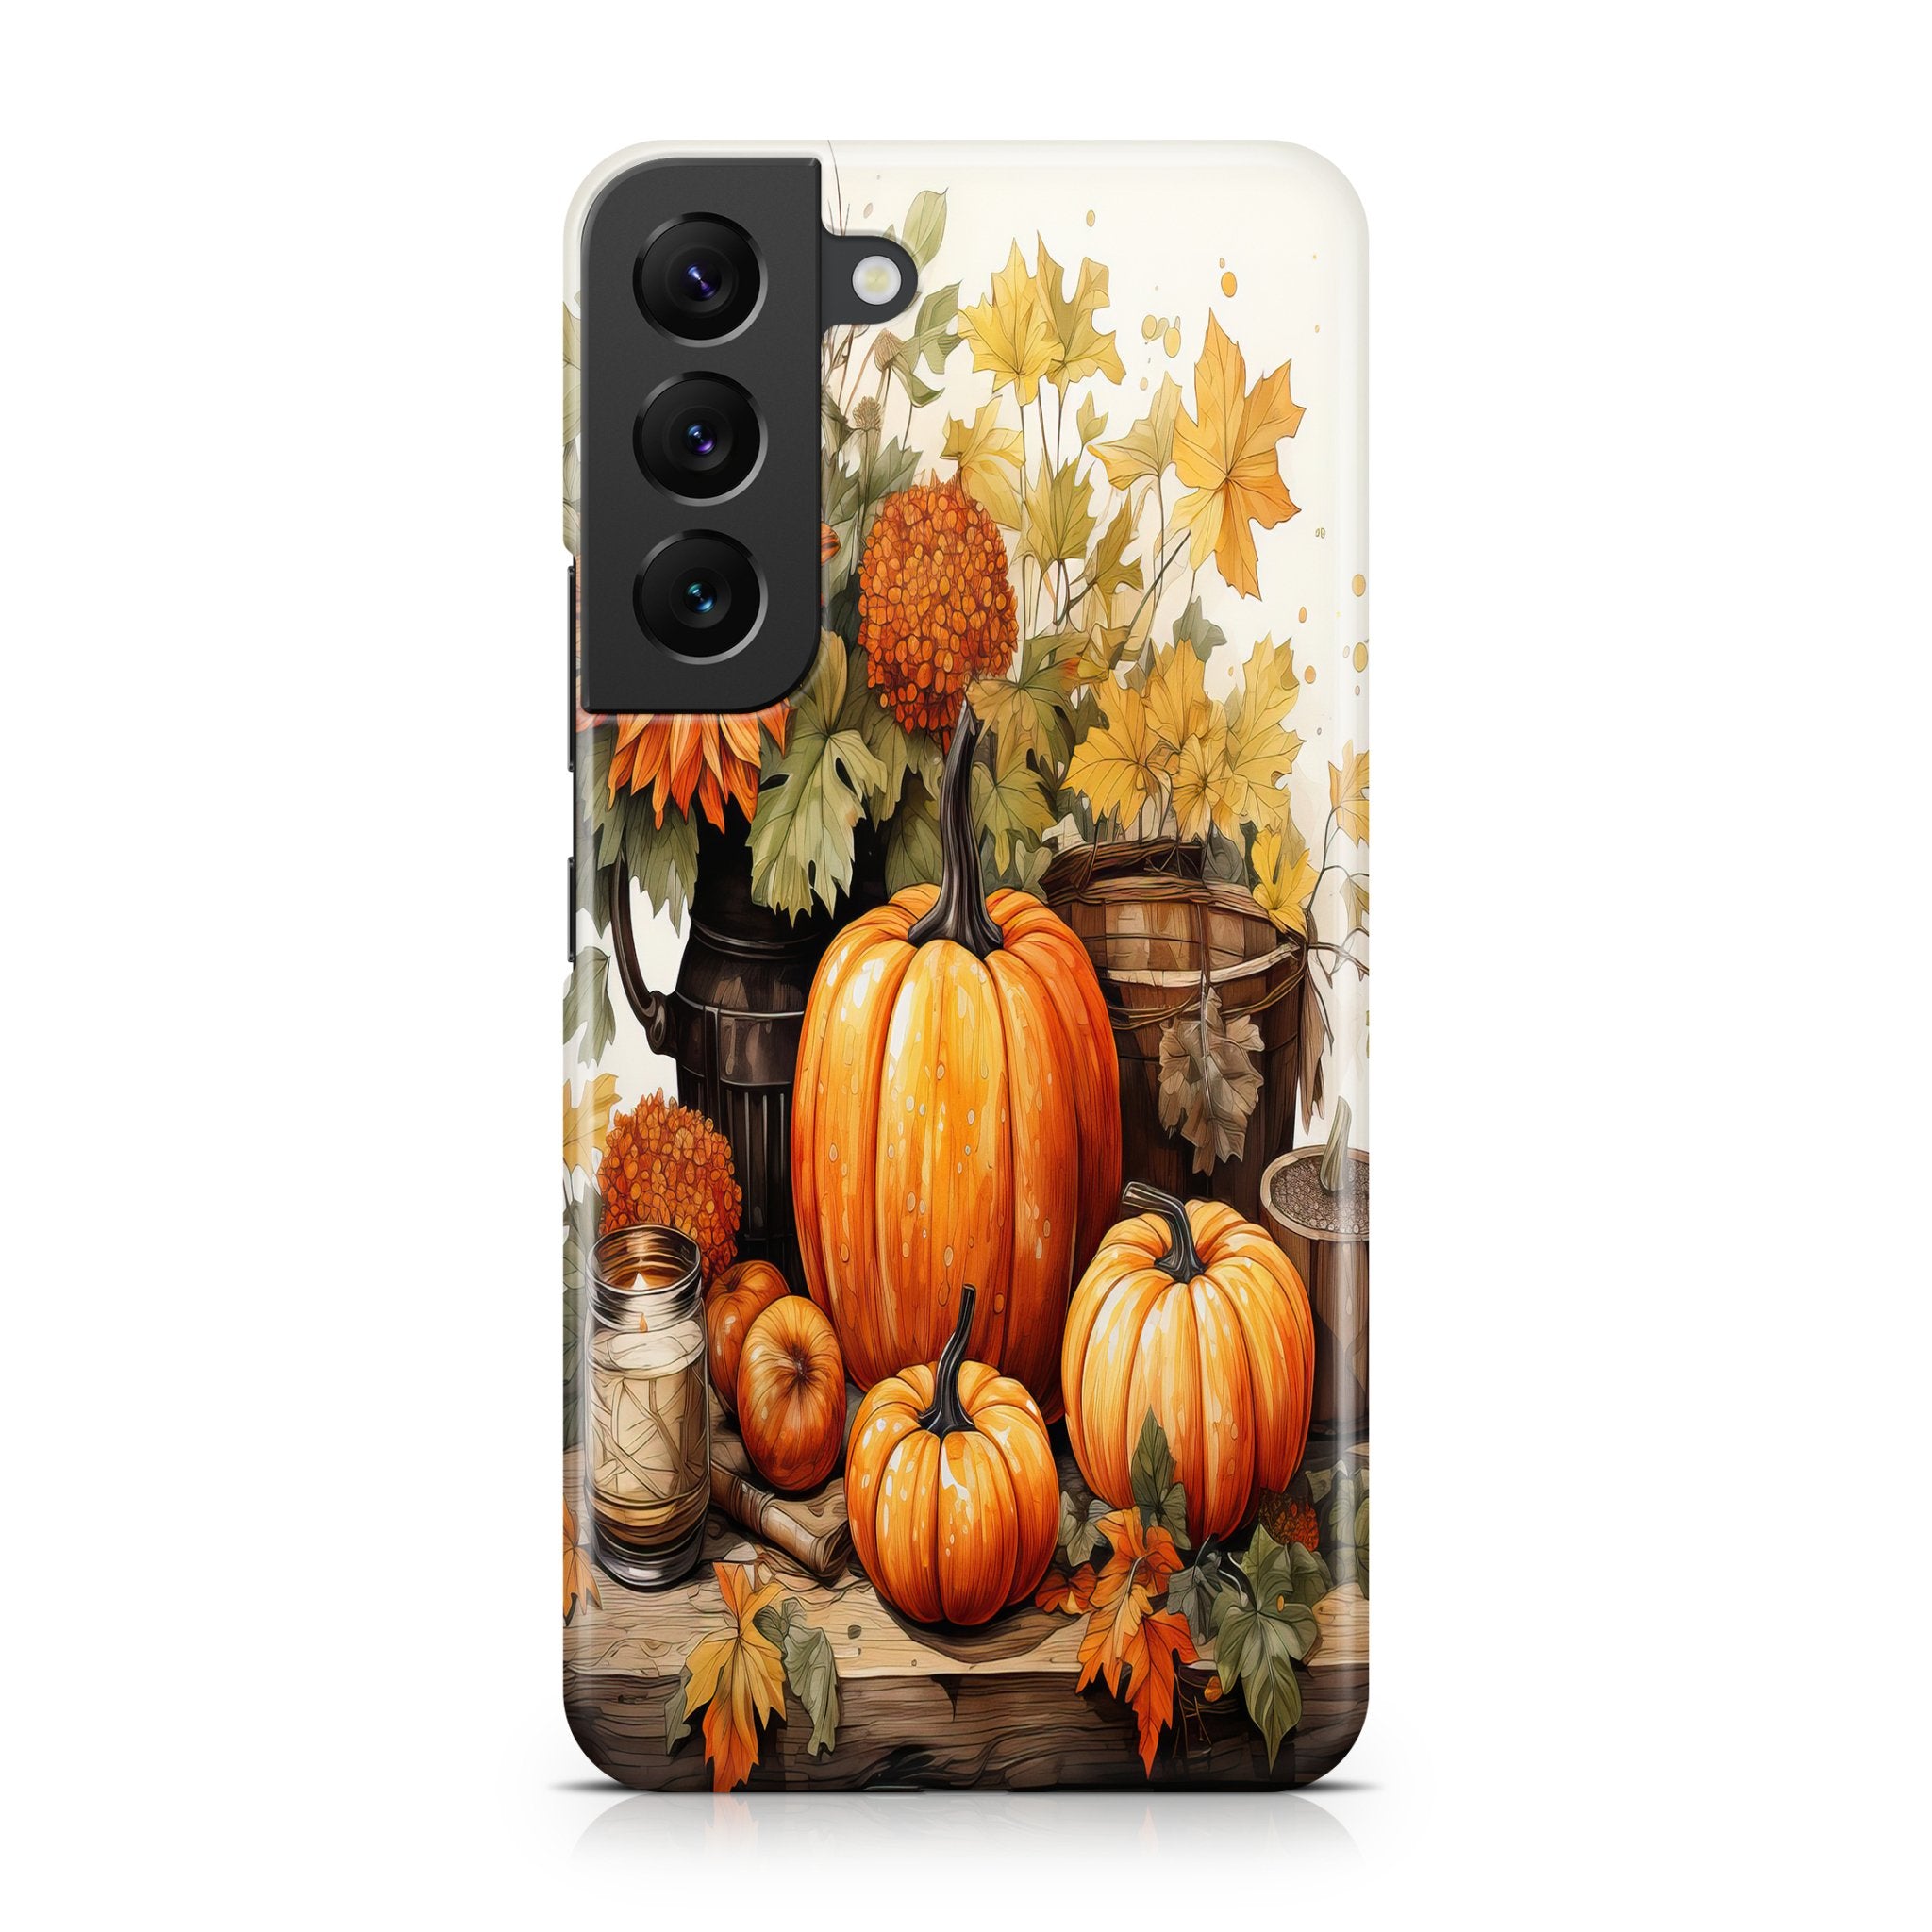 Fall Bounty - Samsung phone case designs by CaseSwagger